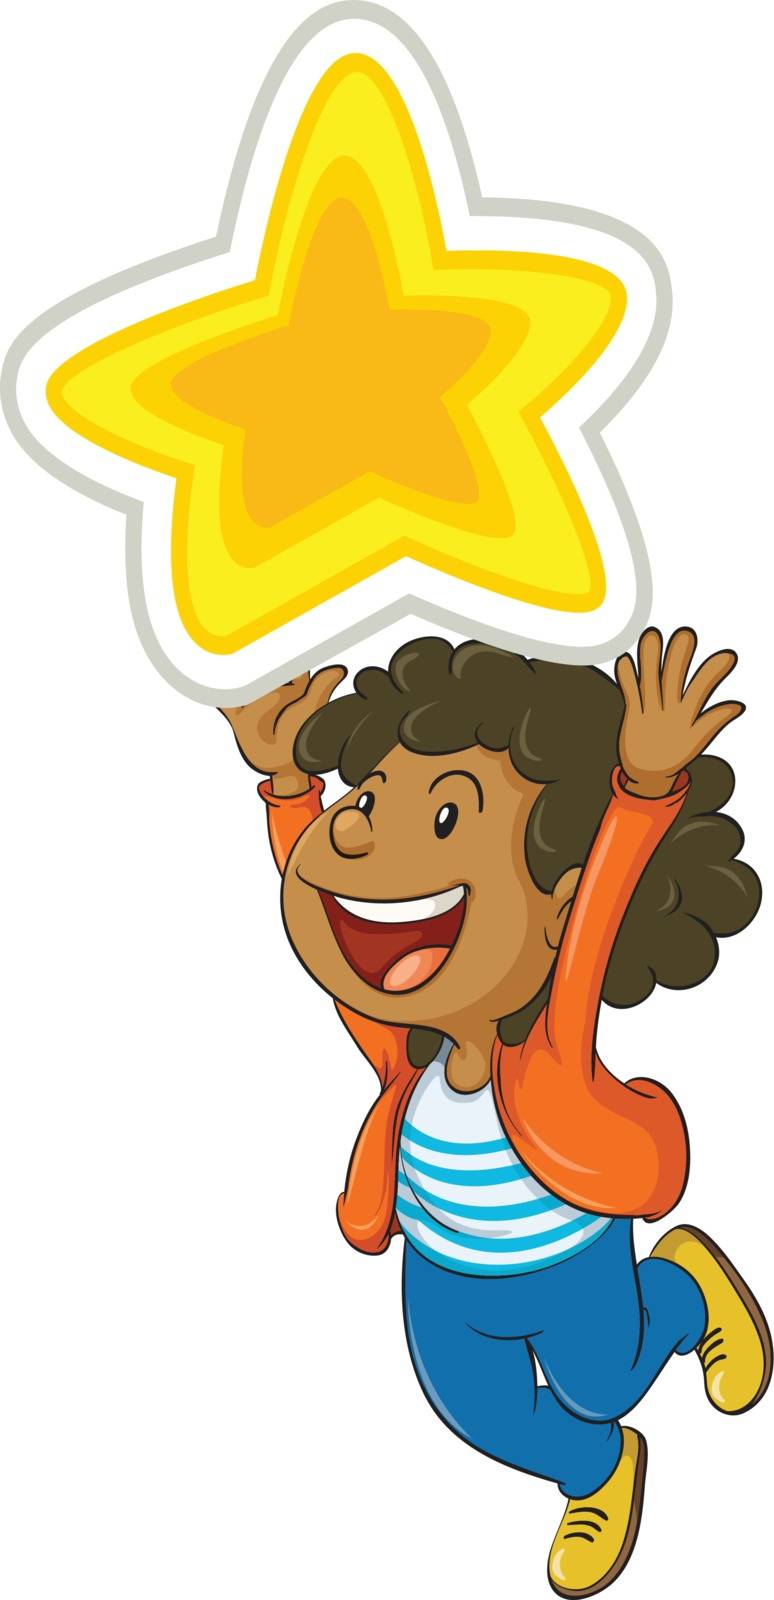 illustration of a girl holding a big star